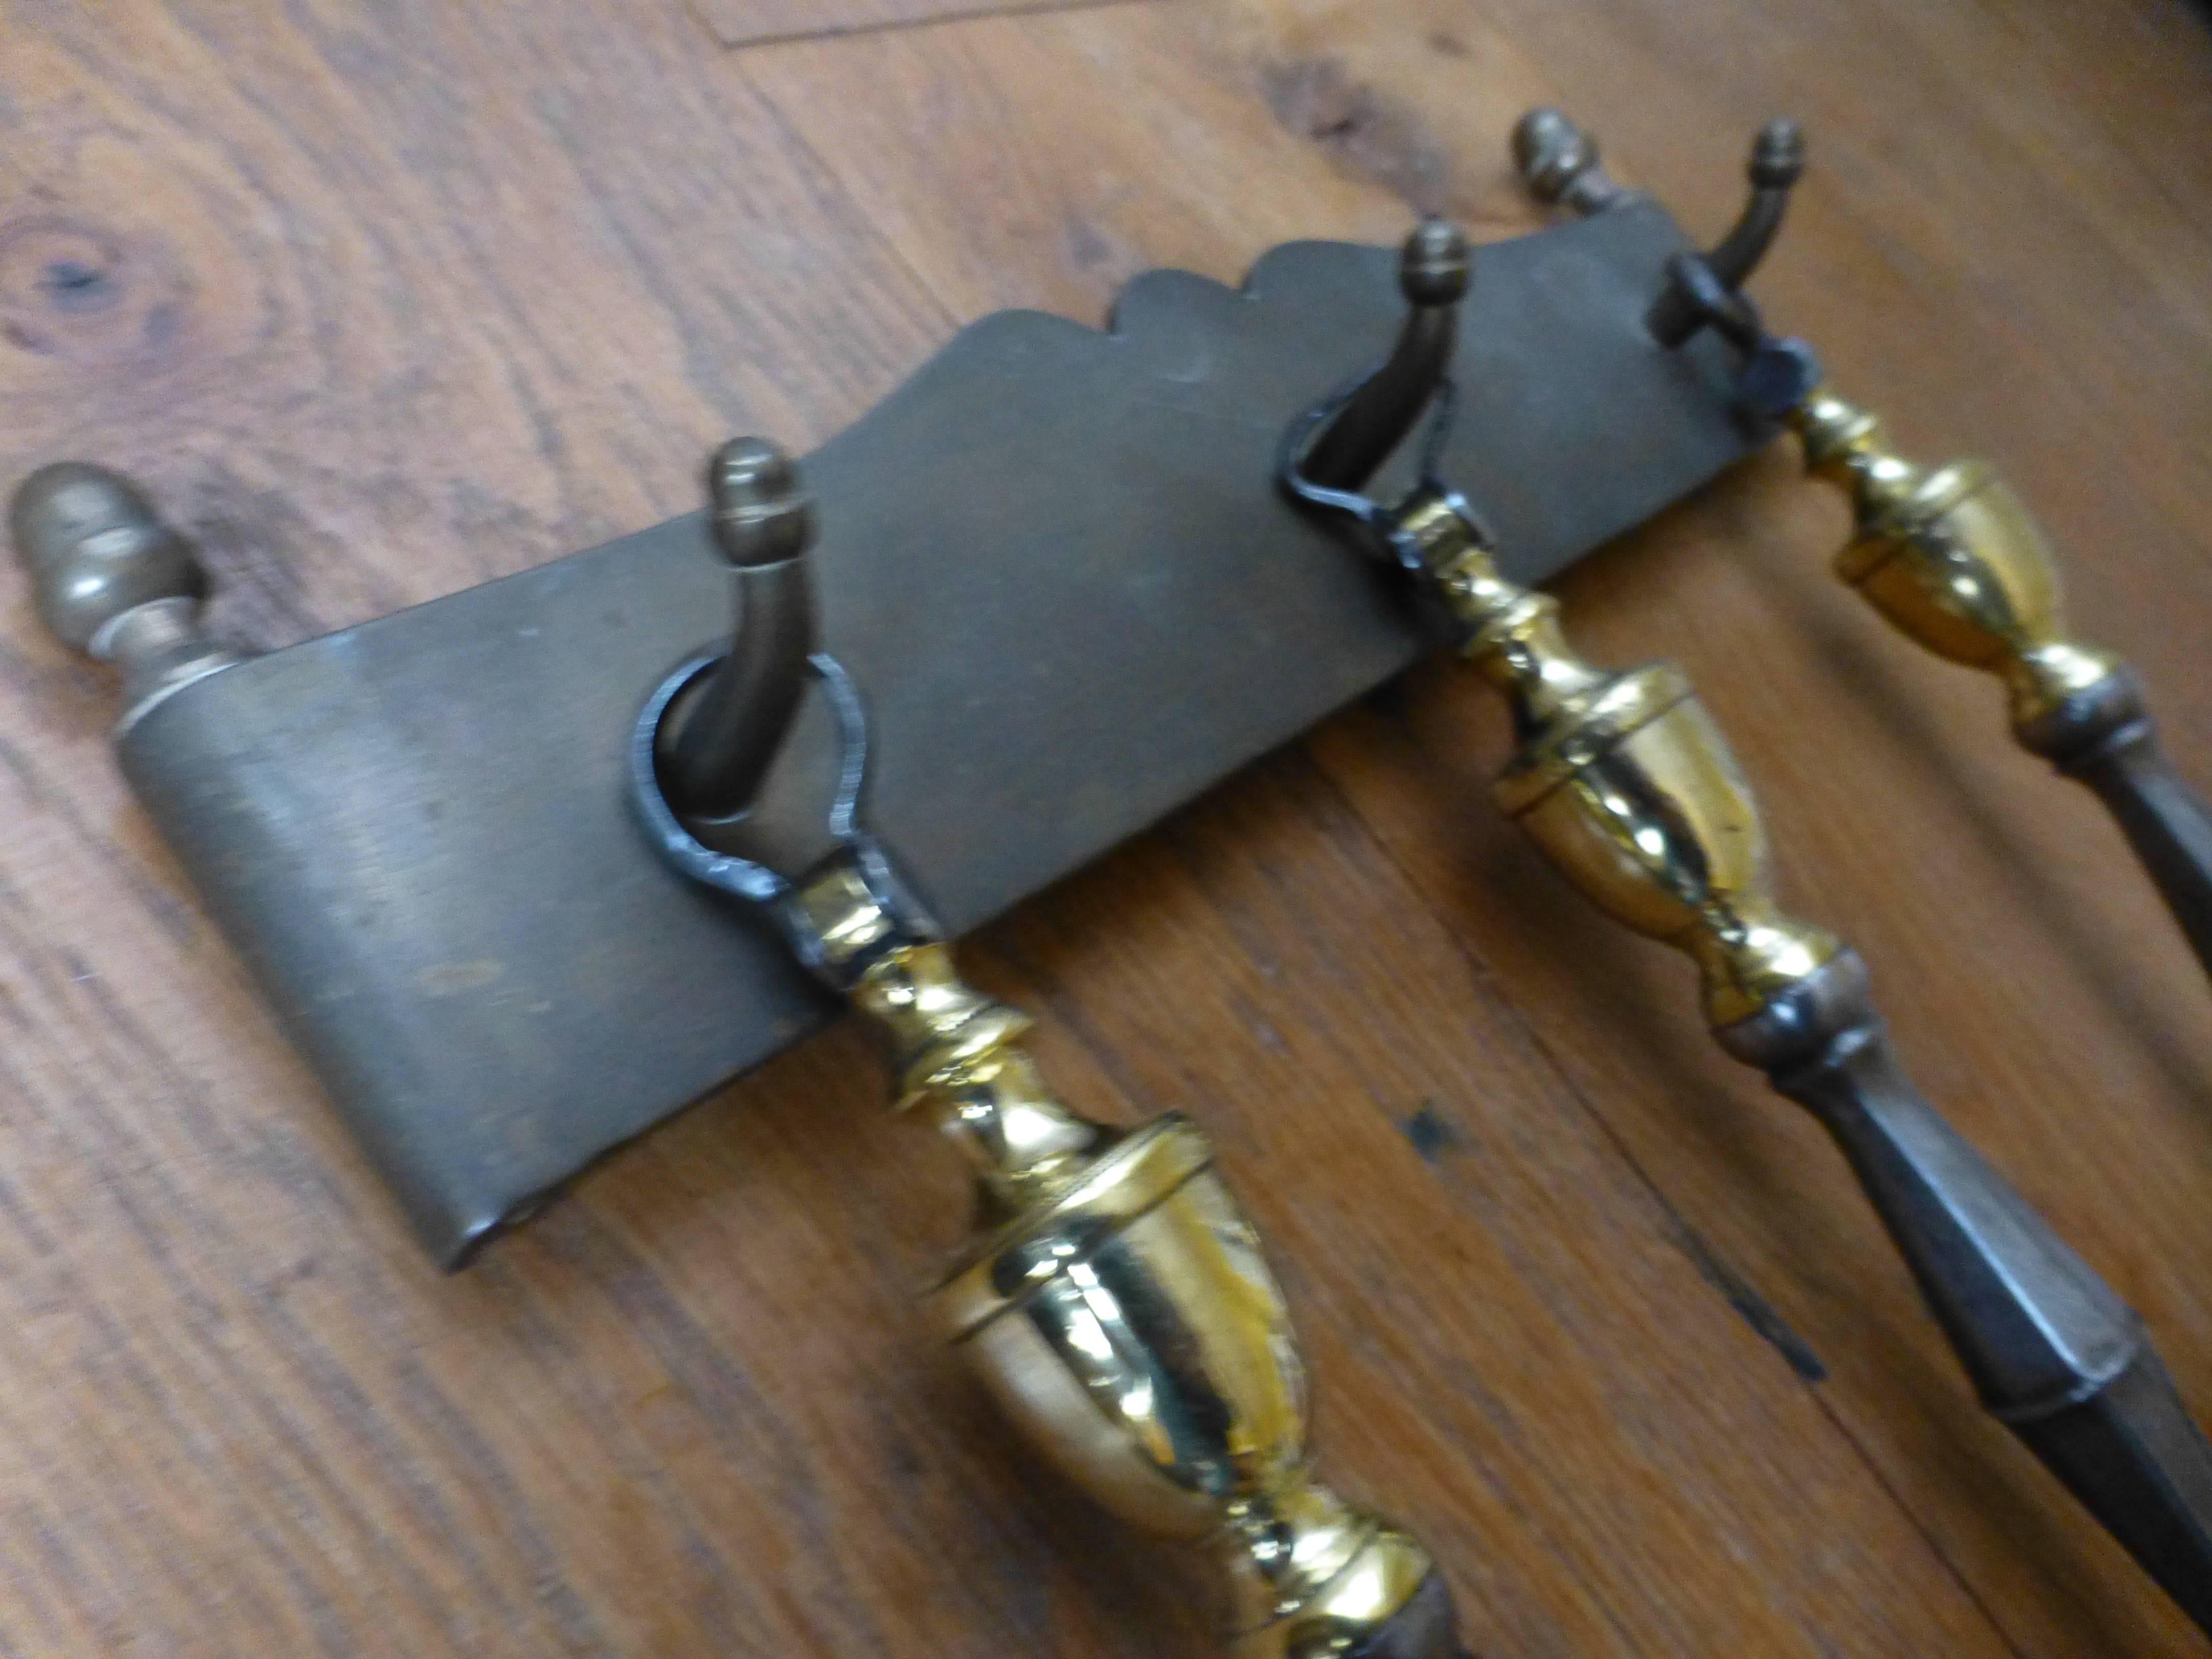 Set of 19th century English fireplace tools. The hanger is made of brass and the tools are made of polished steel and polished brass.